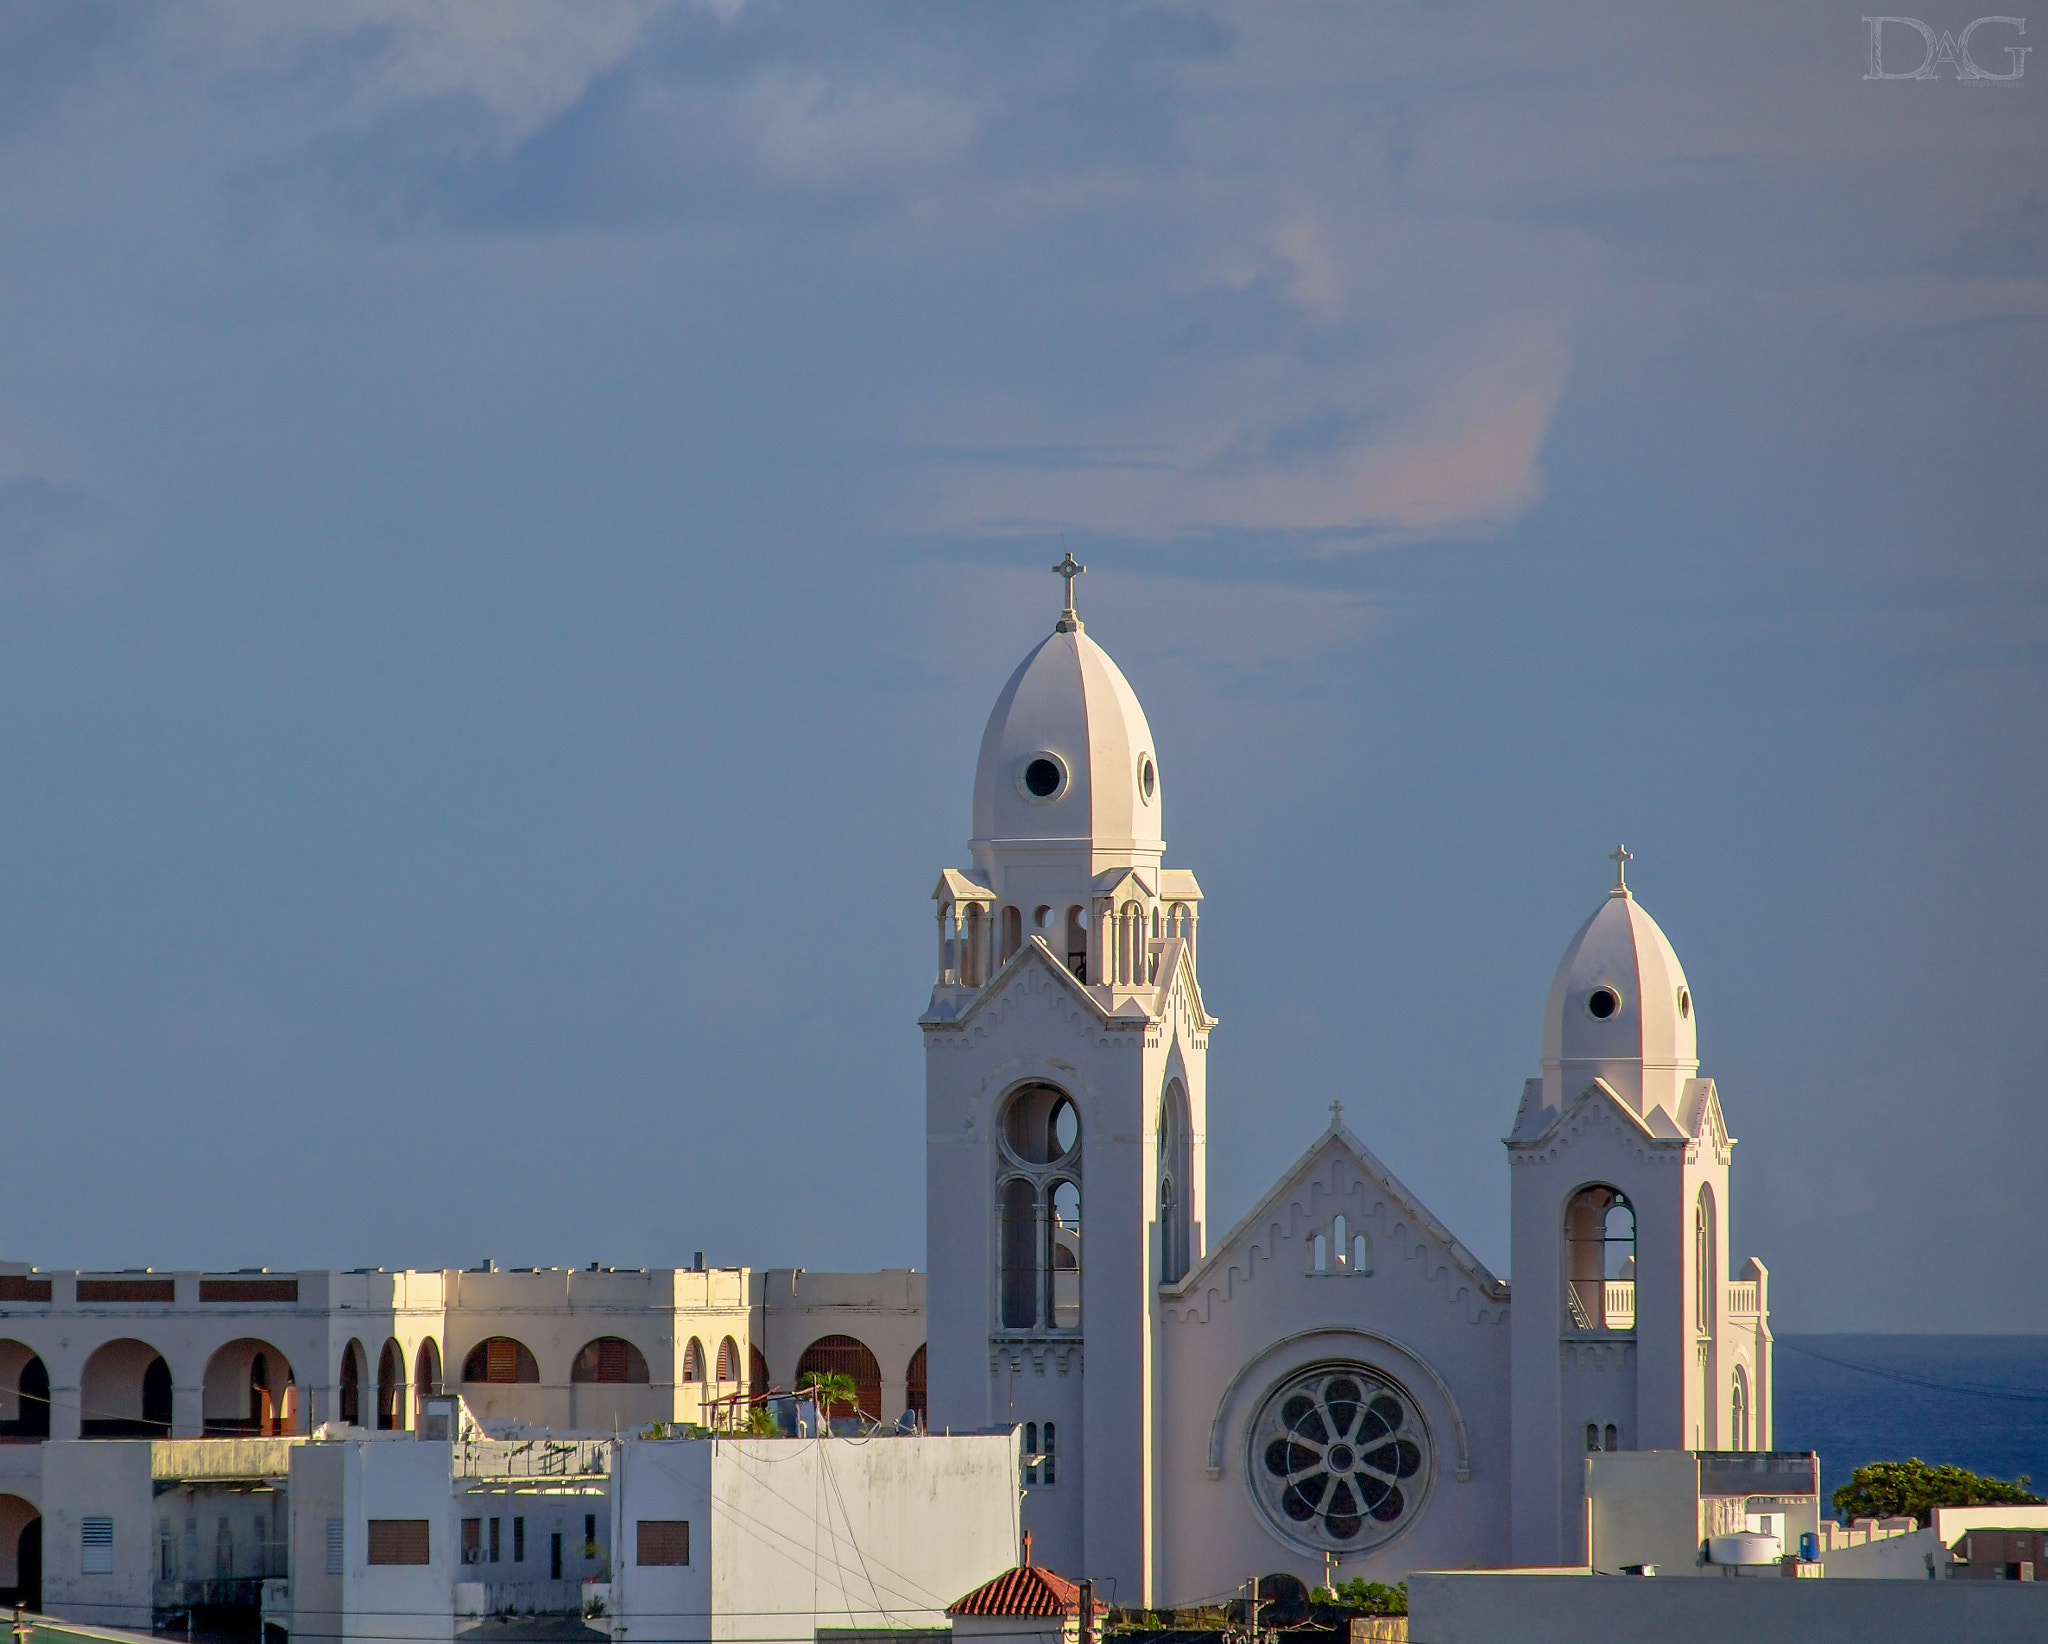 Sony SLT-A77 sample photo. Weisse kirche in san juan - puerto rico photography